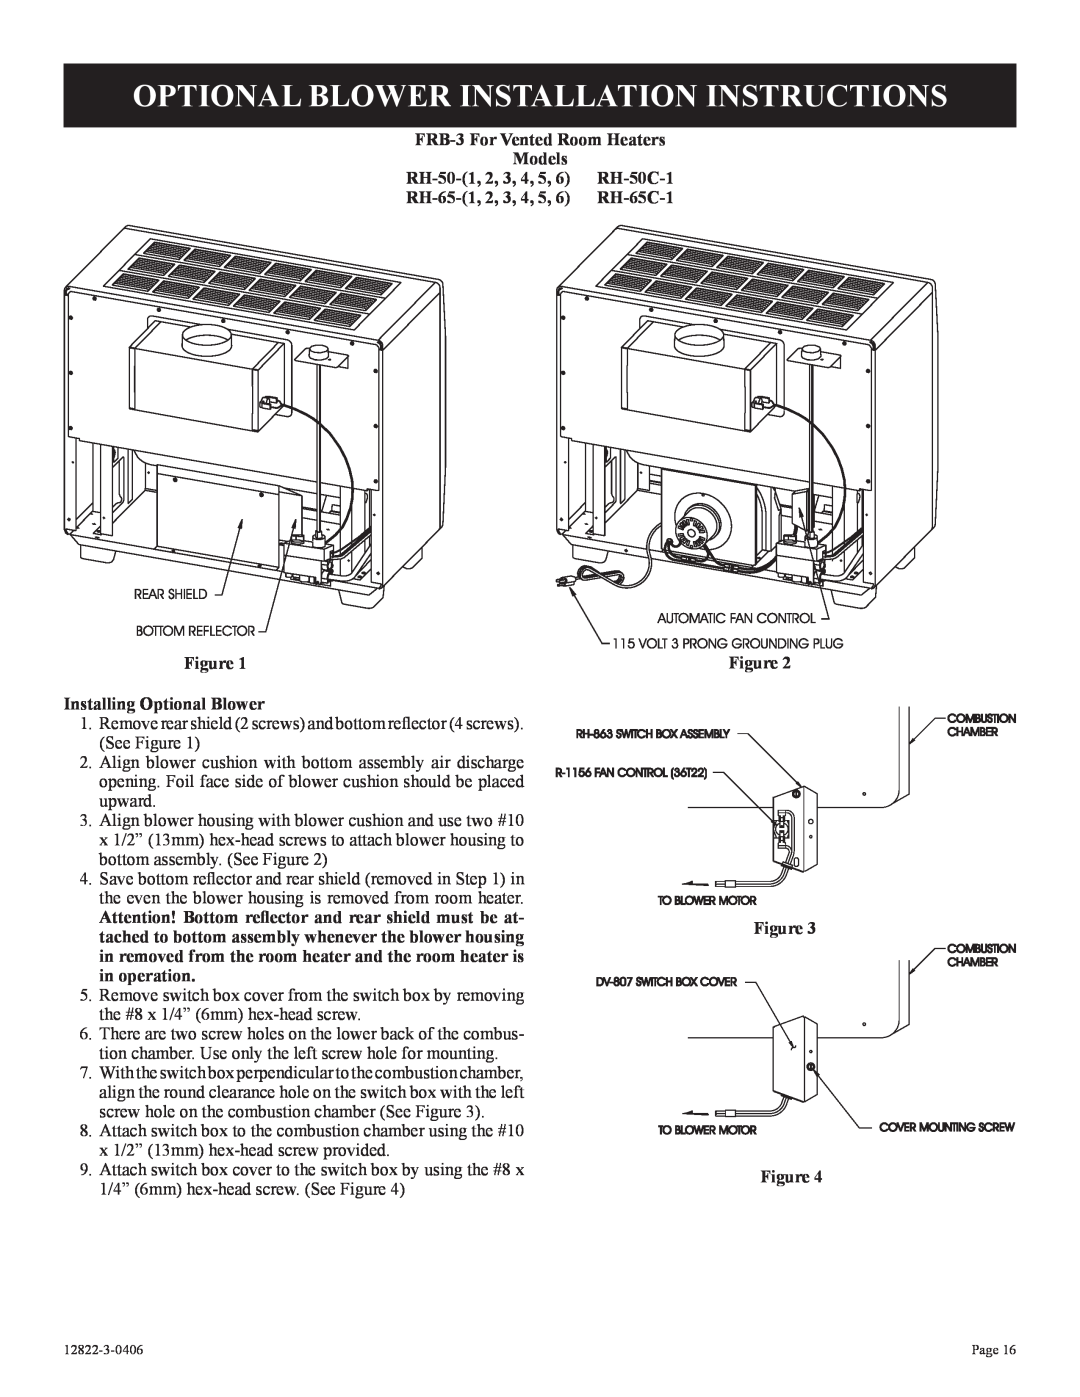 Empire Products RH-50-6 Optional Blower Installation Instructions, FRB-3For Vented Room Heaters, Models, RH-50-1,2 